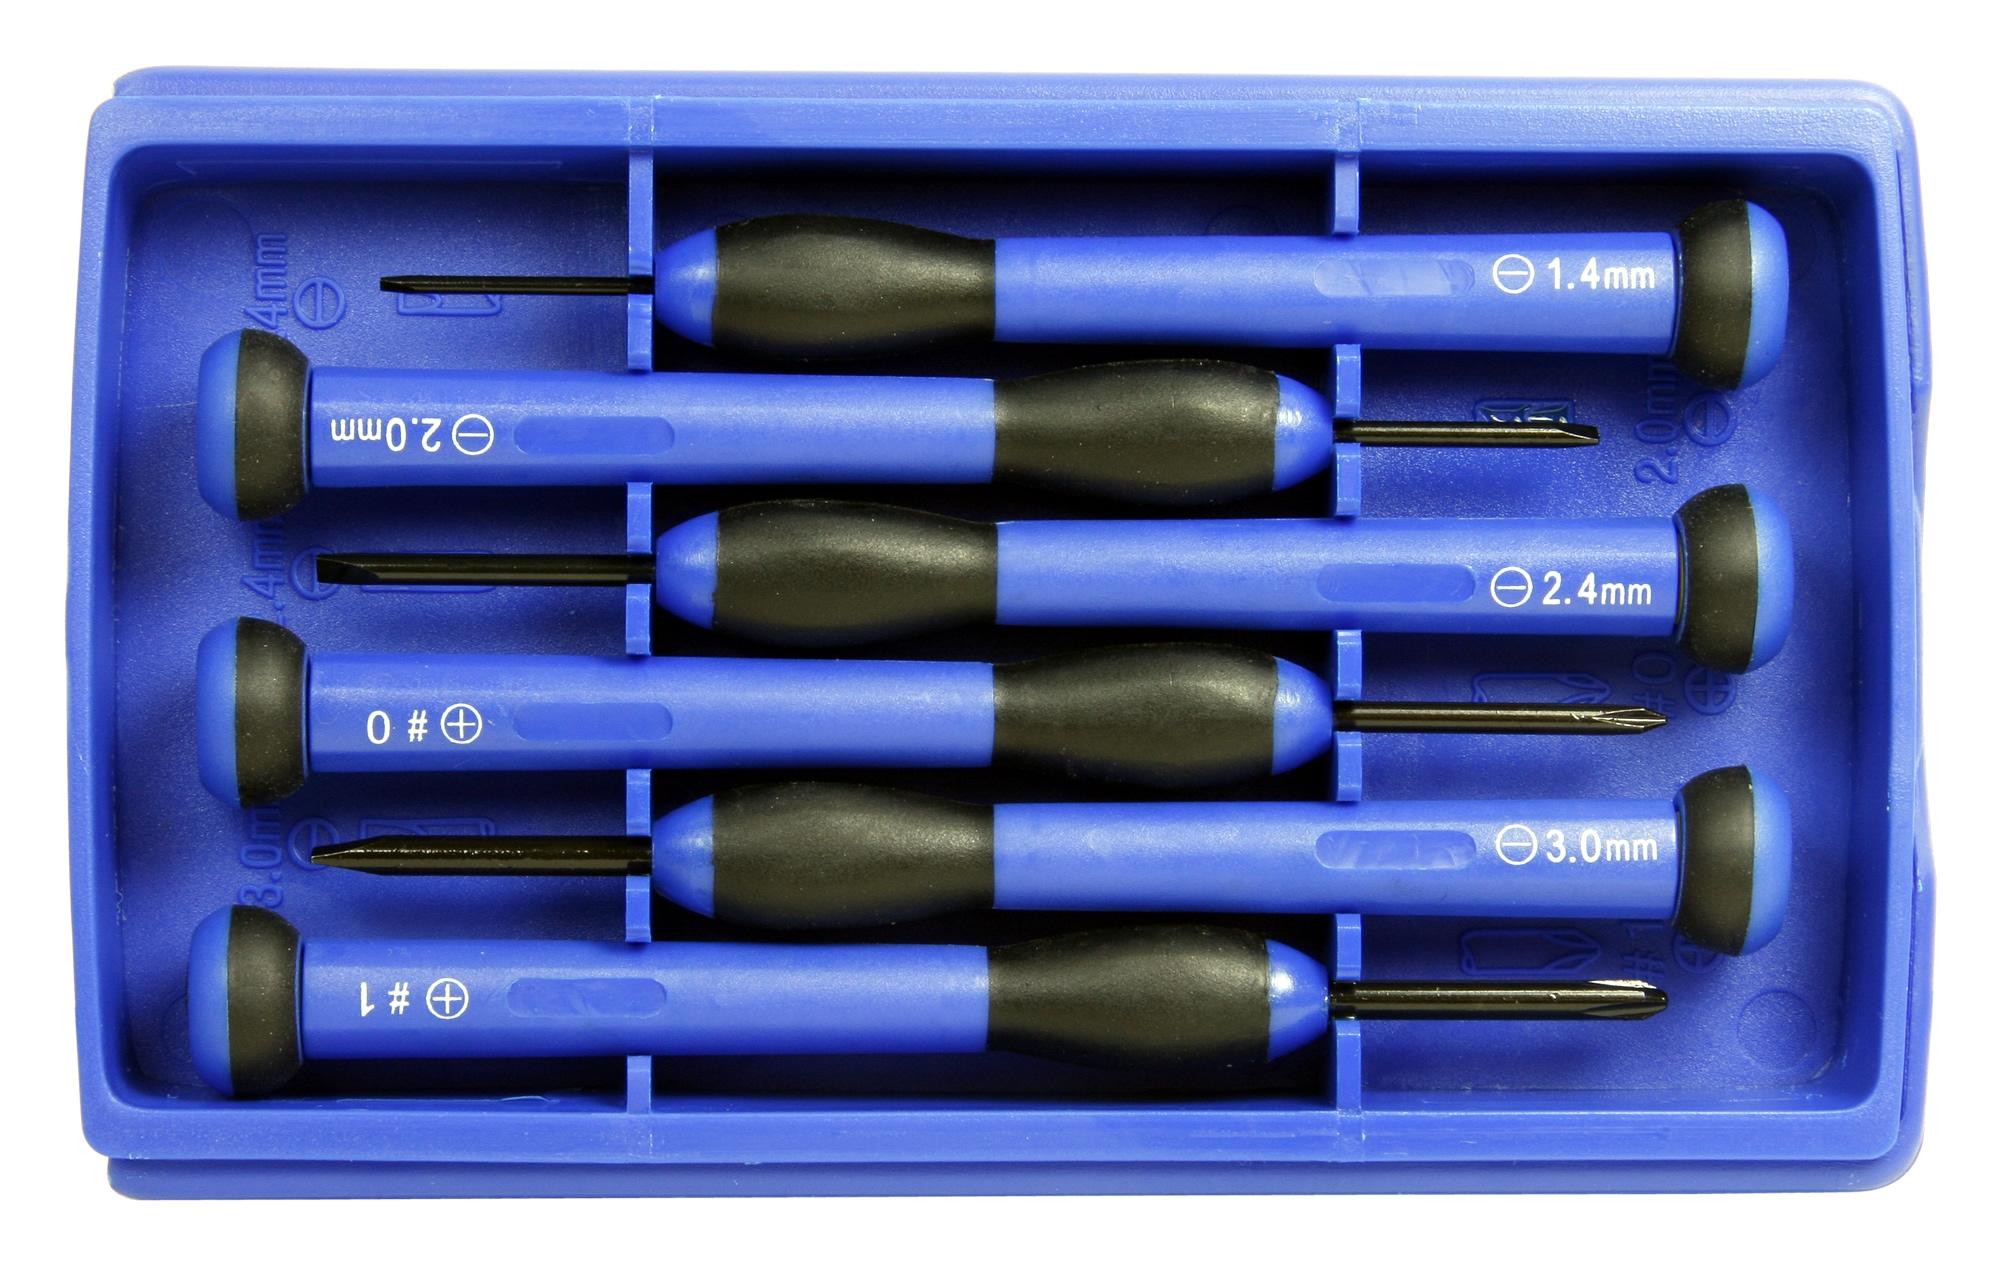 Details about   6-Piece Precision Screwdriver Set Phillips & Slotted Glasses Watches Repairs Blk